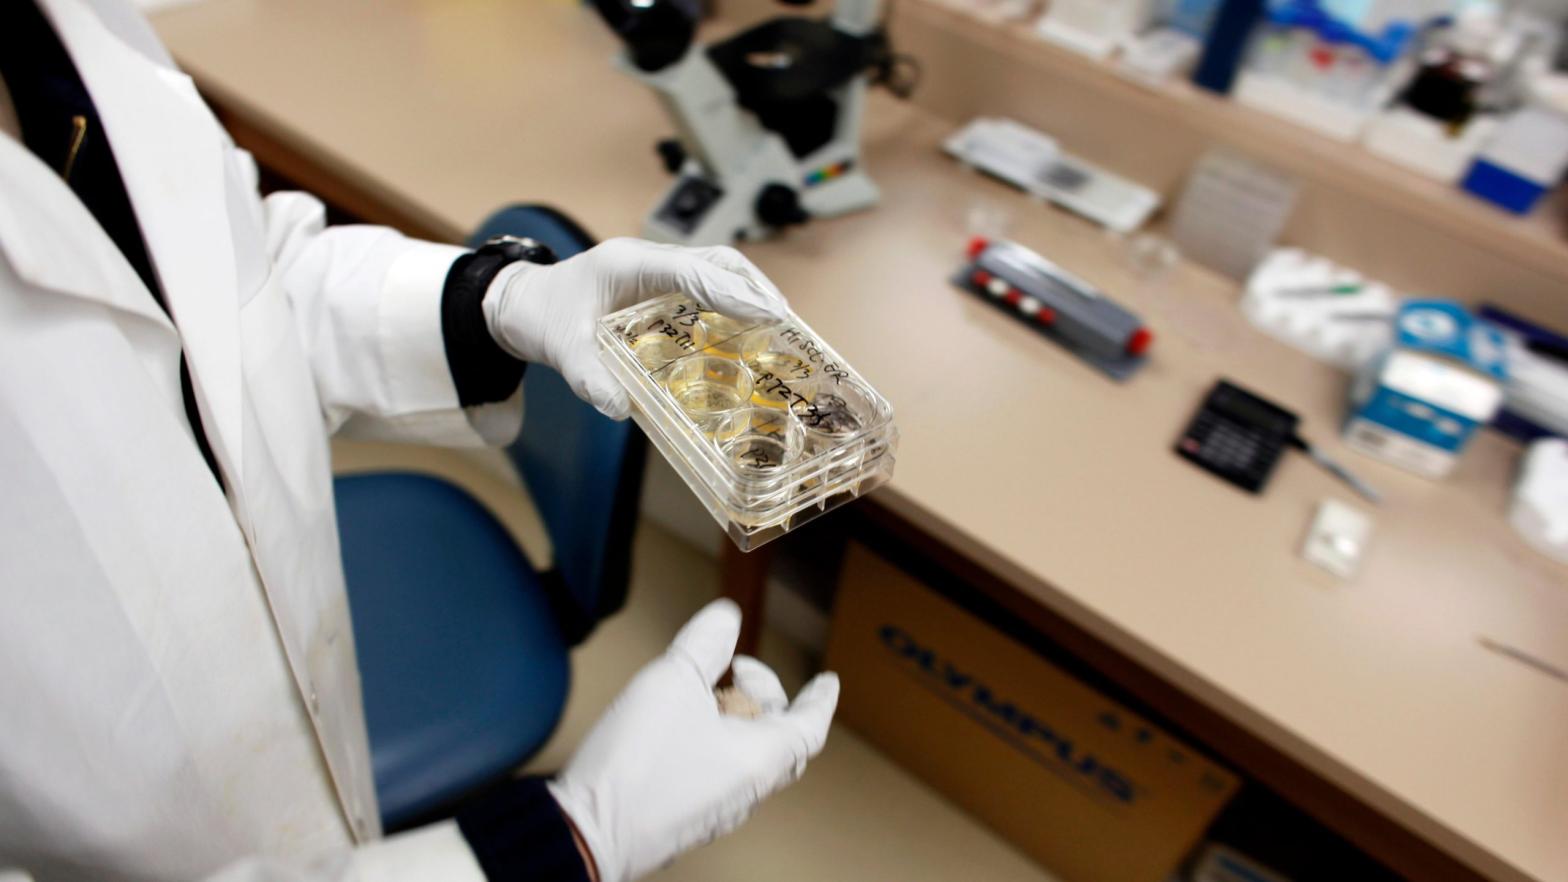 A scientist handling a colony of stem cells at the Wisconsin National Primate Research Centre at University Wisconsin-Madison. (Photo: Darren Hauck, Getty Images)